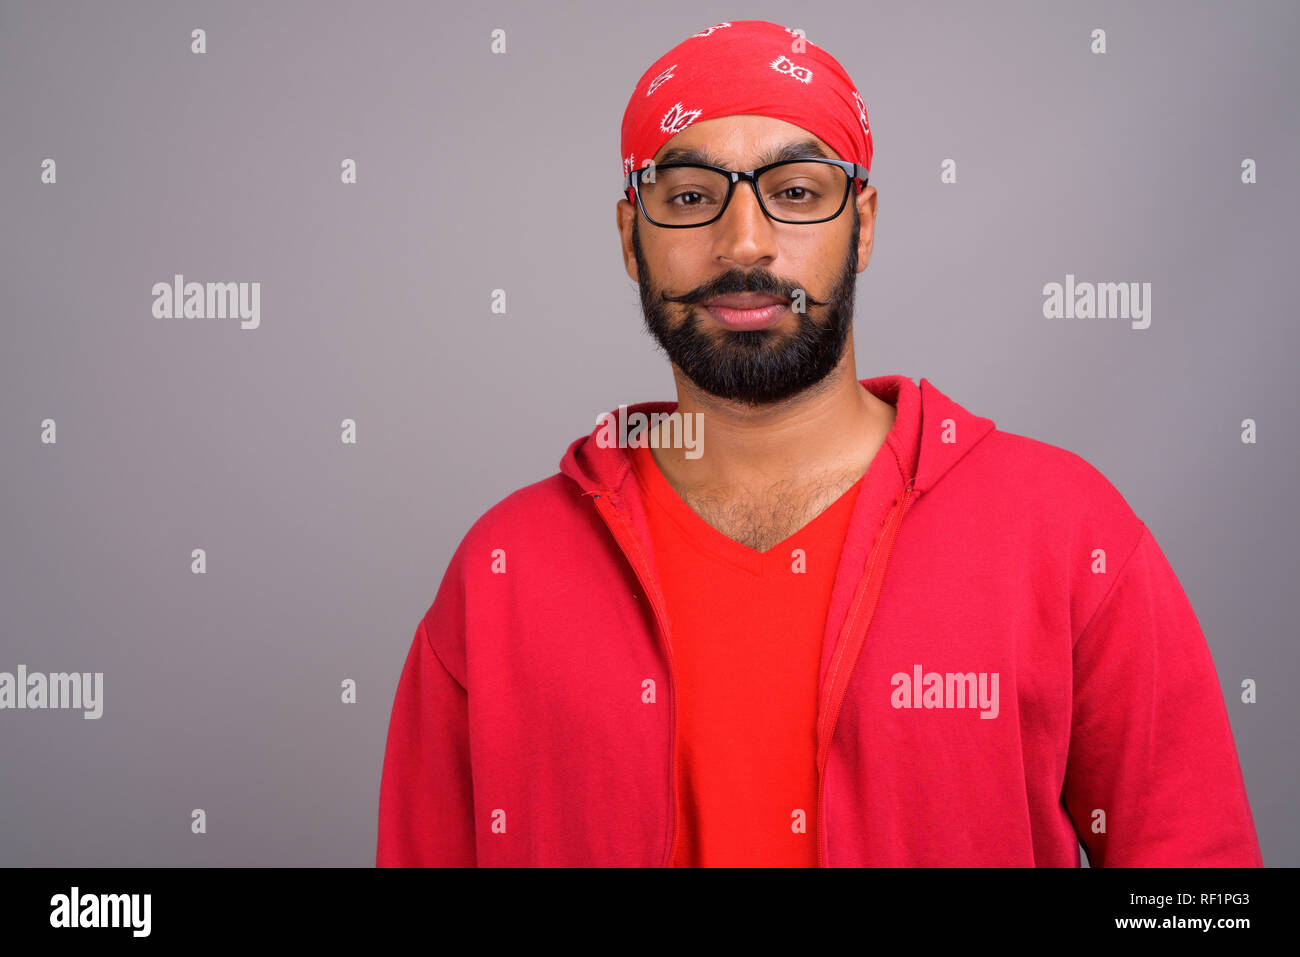 Portrait of young handsome Indian man wearing red shirt Stock Photo